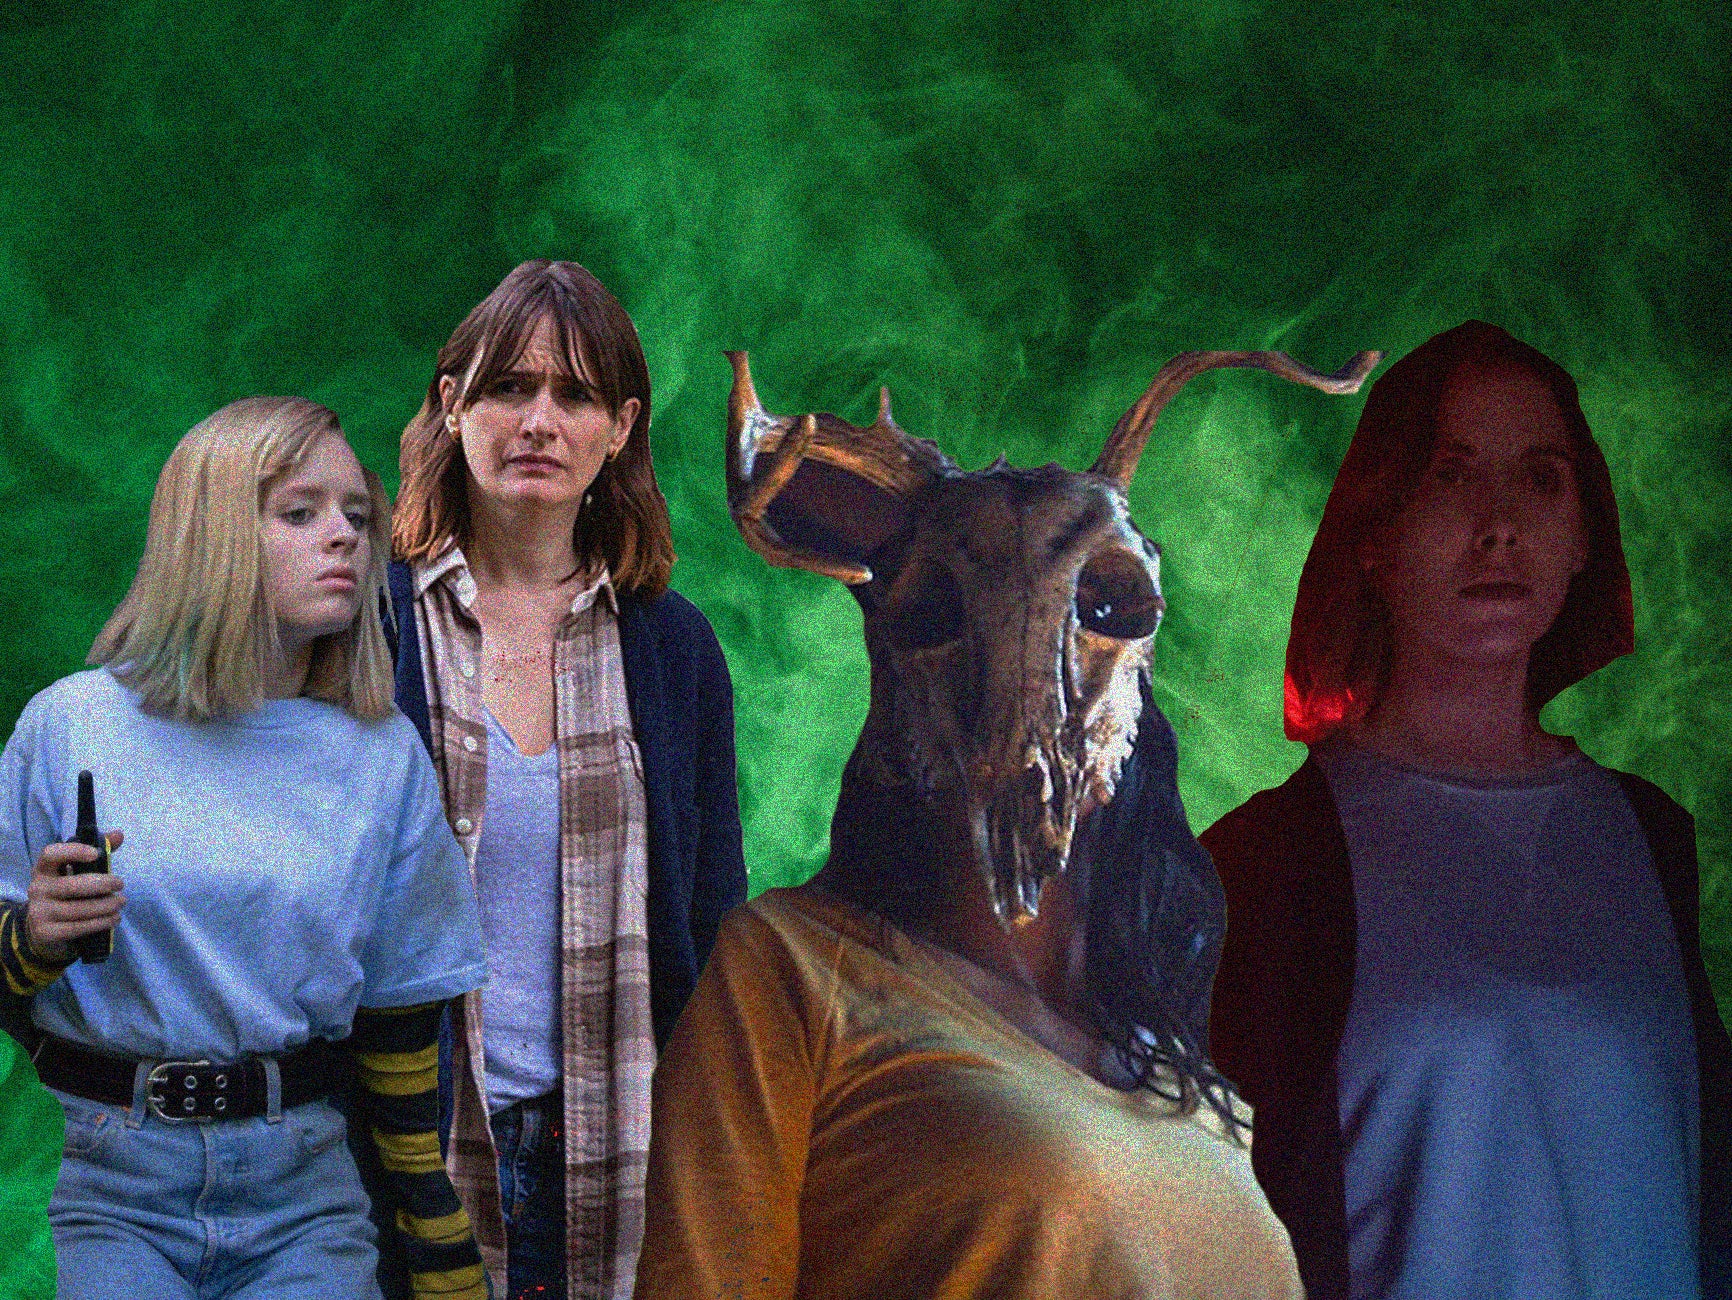 From left to right: Lulu Wilson in Becky, Emily Mortimer in Relic, Azie Tesfai in The Wretched and Alison Brie in The Rental